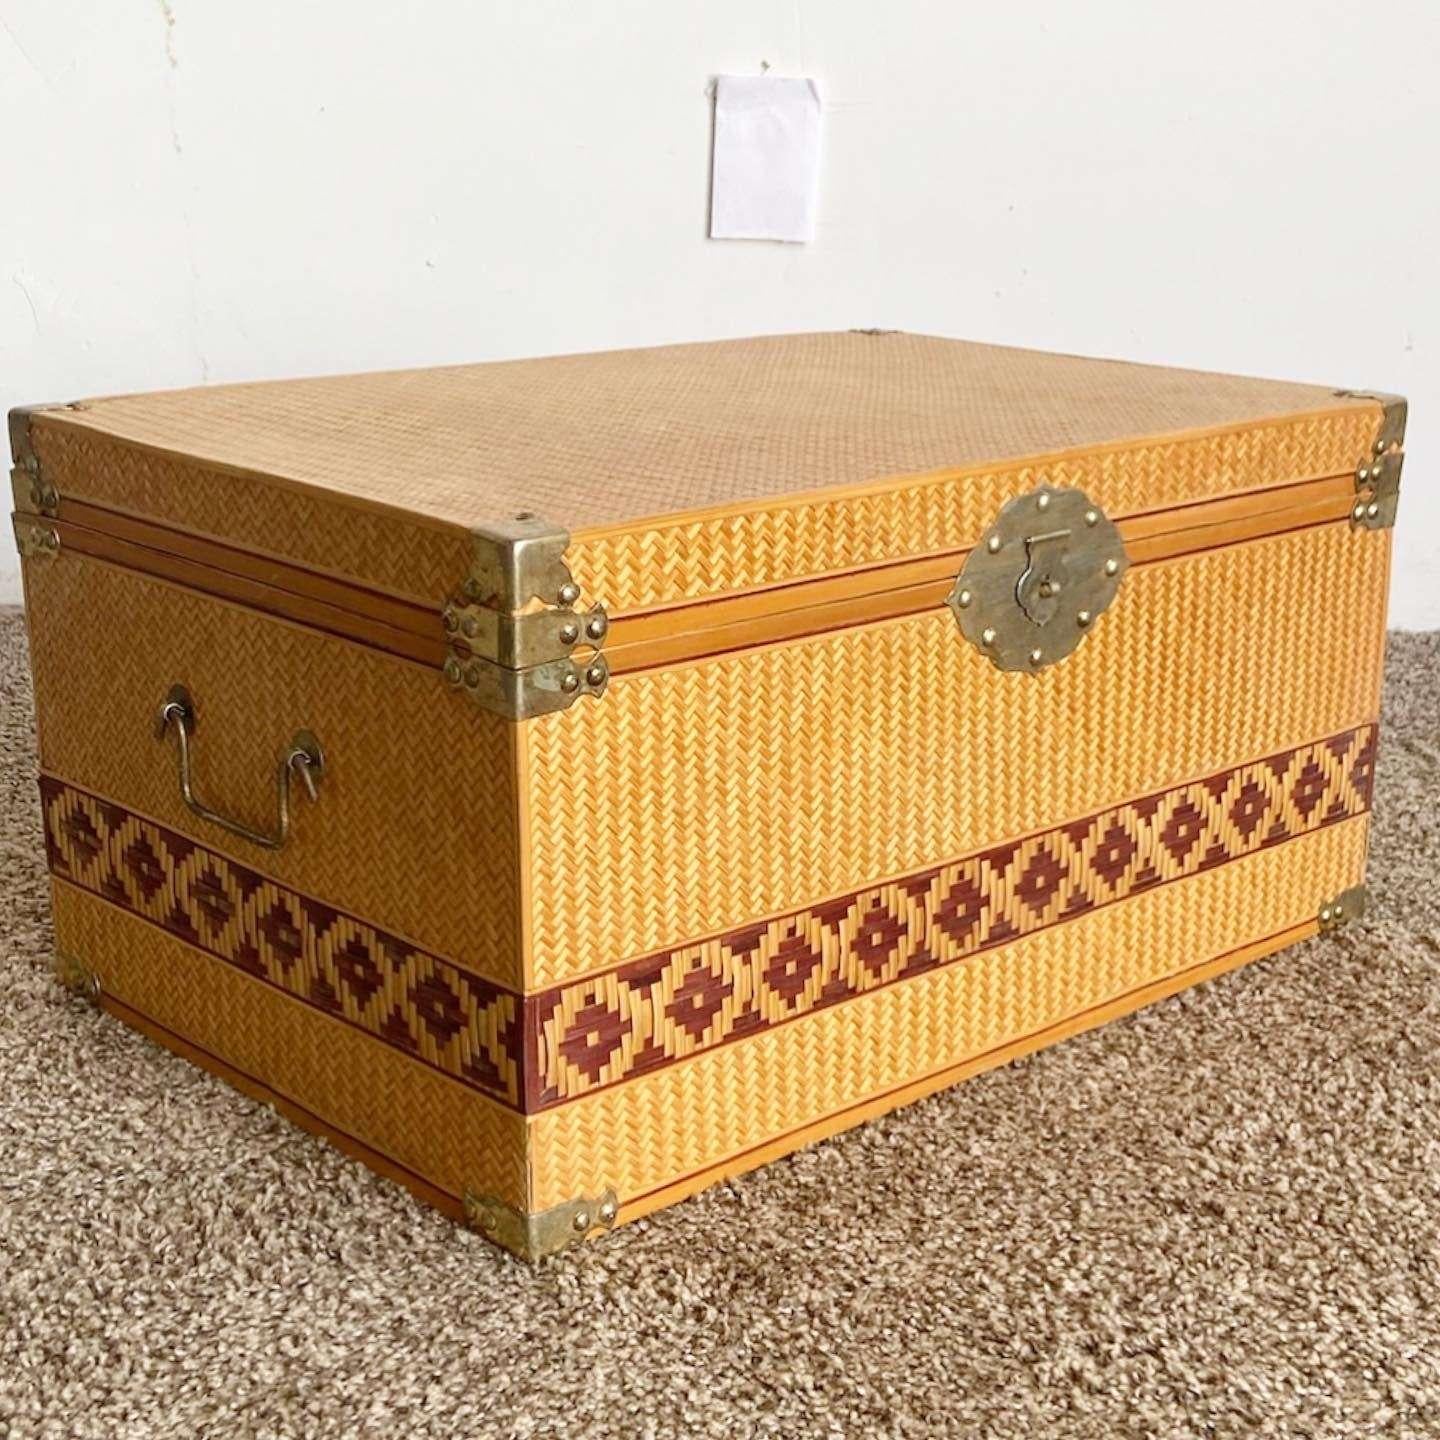 Vintage bohemian wicker storage chest/trunk. Features a natural finish throughout.

